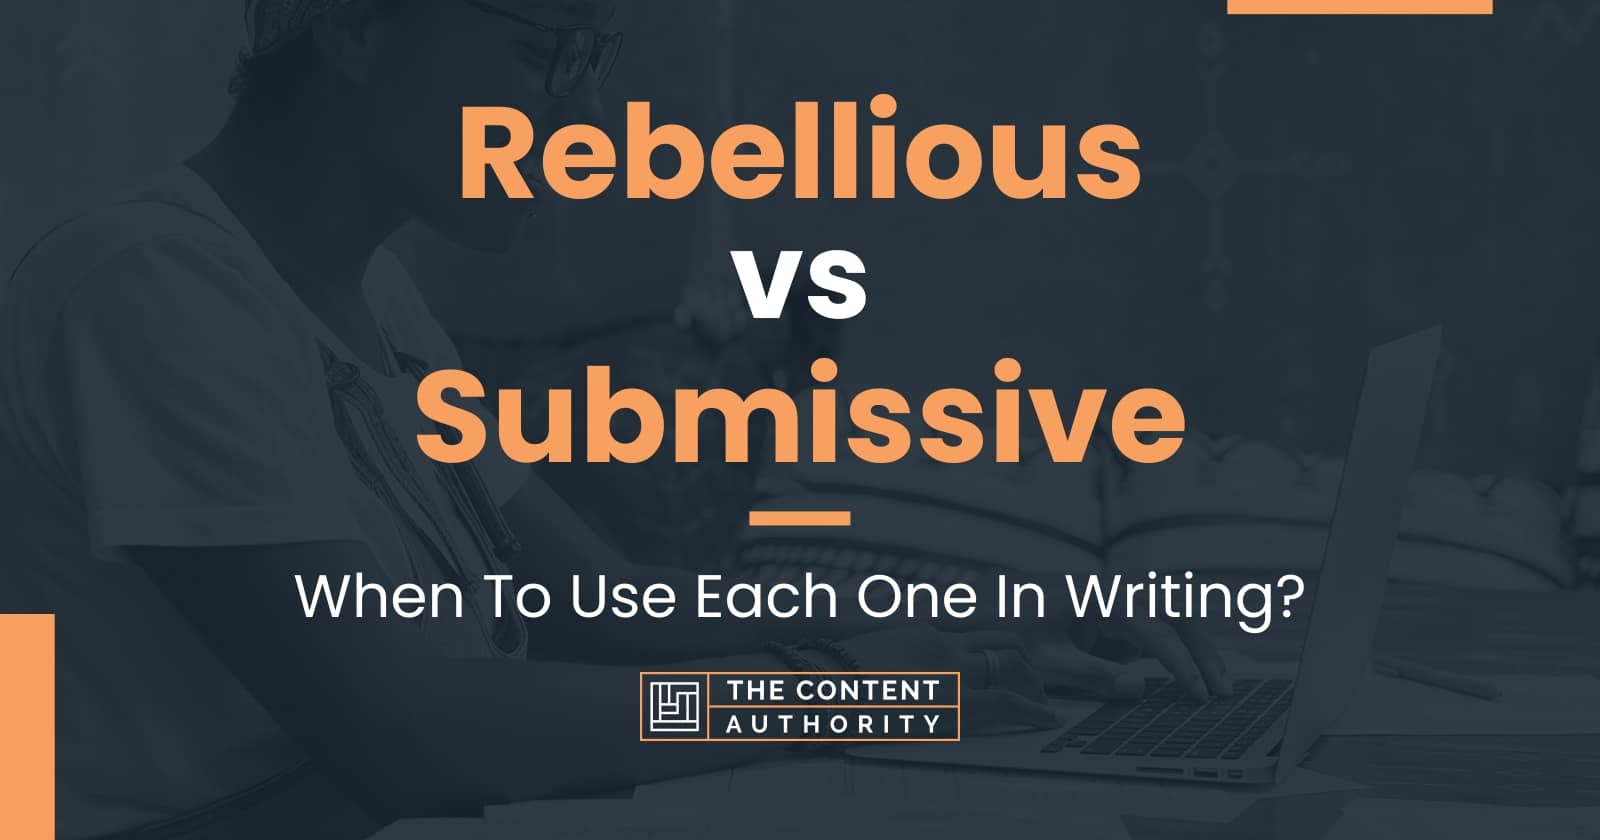 Rebellious vs Submissive: When To Use Each One In Writing?